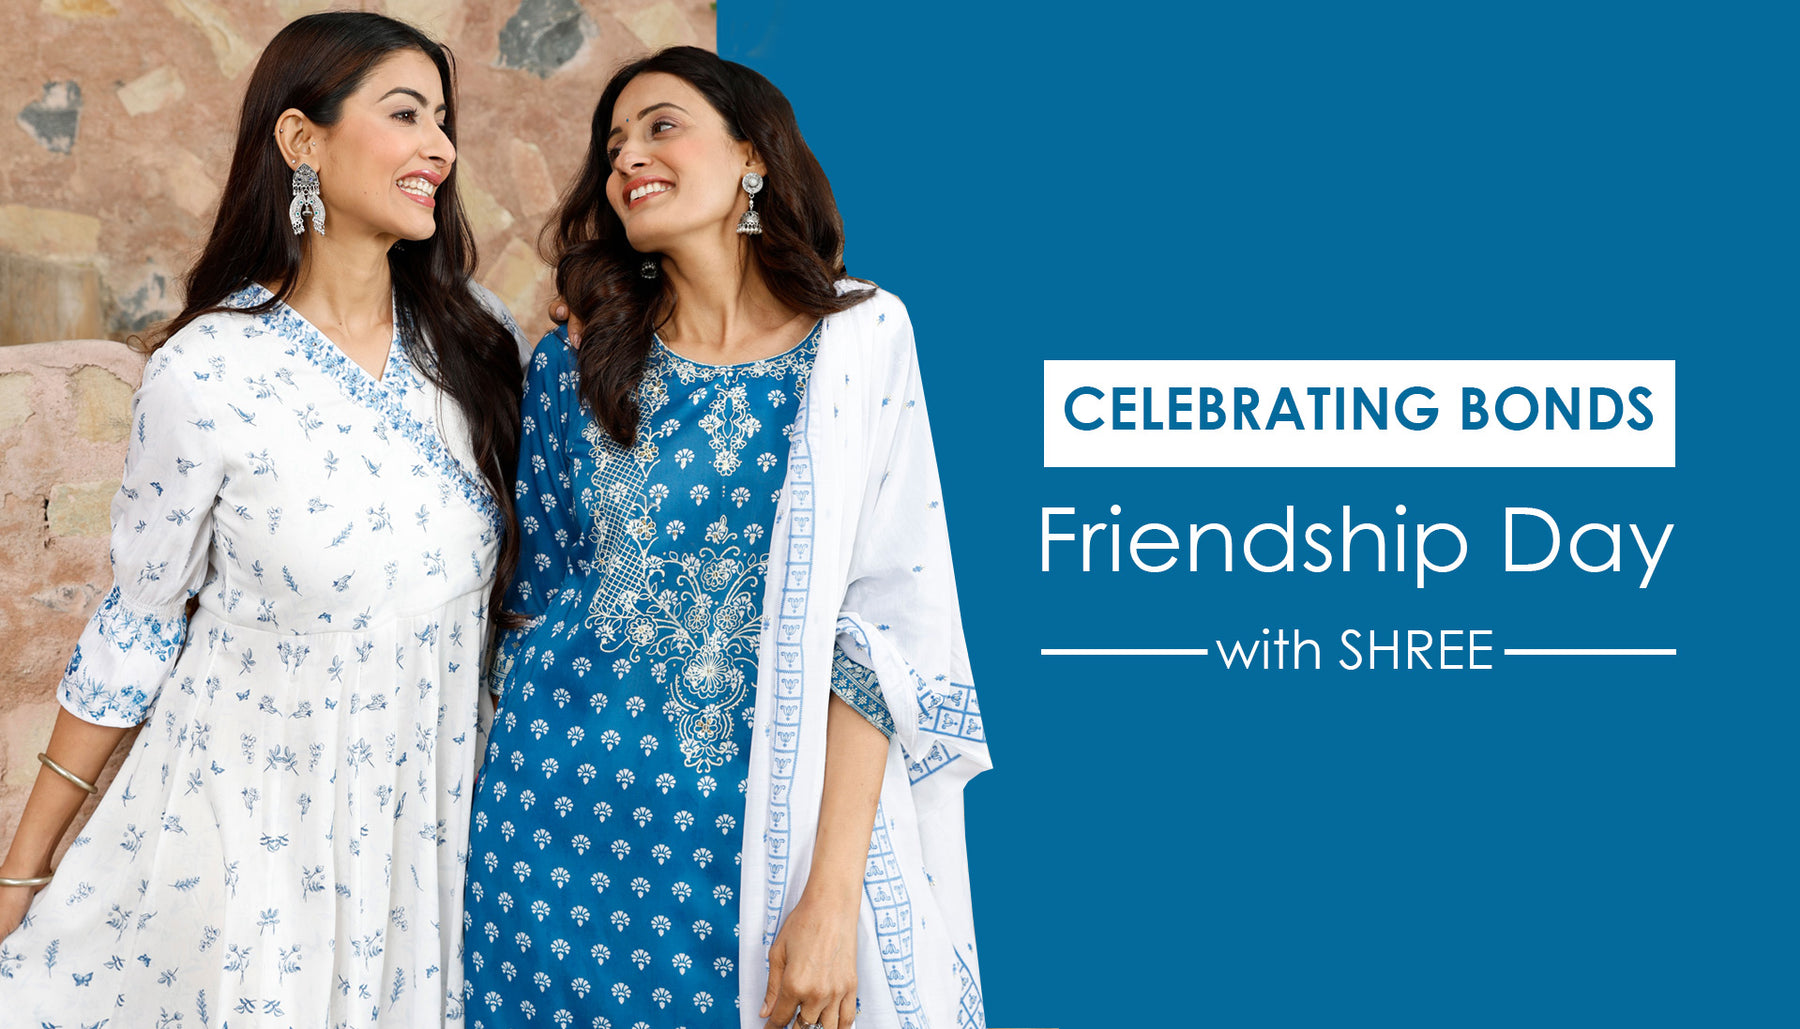 Celebrating Bonds: Friendship Day With SHREE - Embrace The Joy Of True Connections!